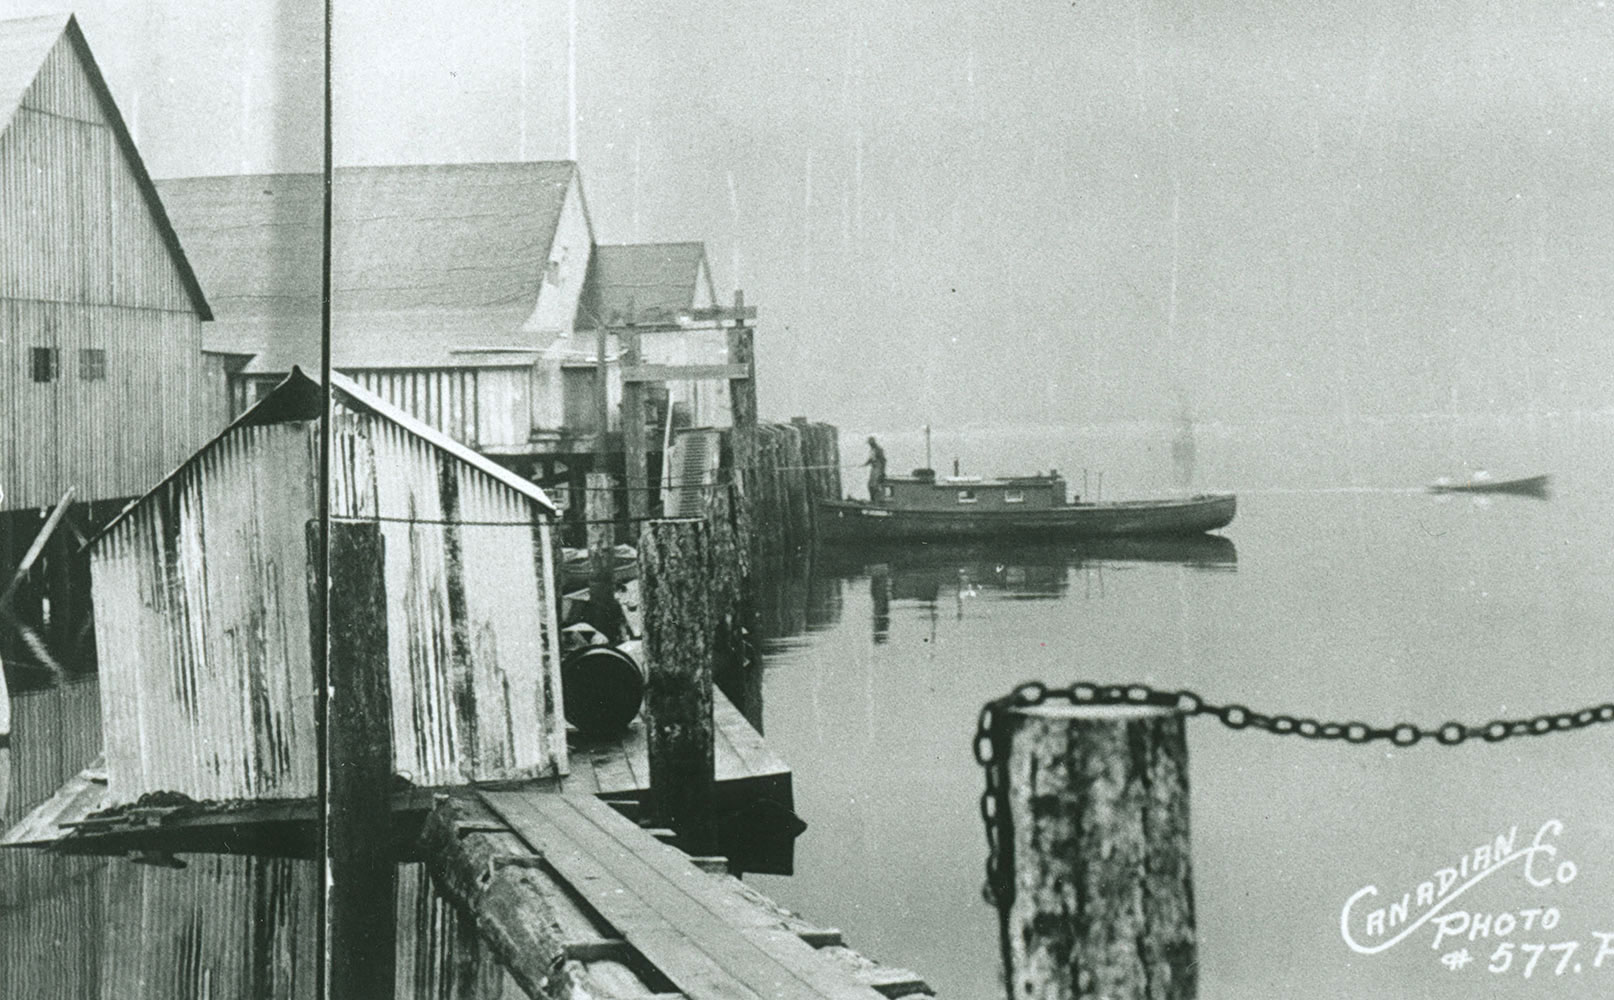 The main cannery building is supported by floats and pilings. The words "Canadian Co. Photo #577.P." are inscribed on the photo.